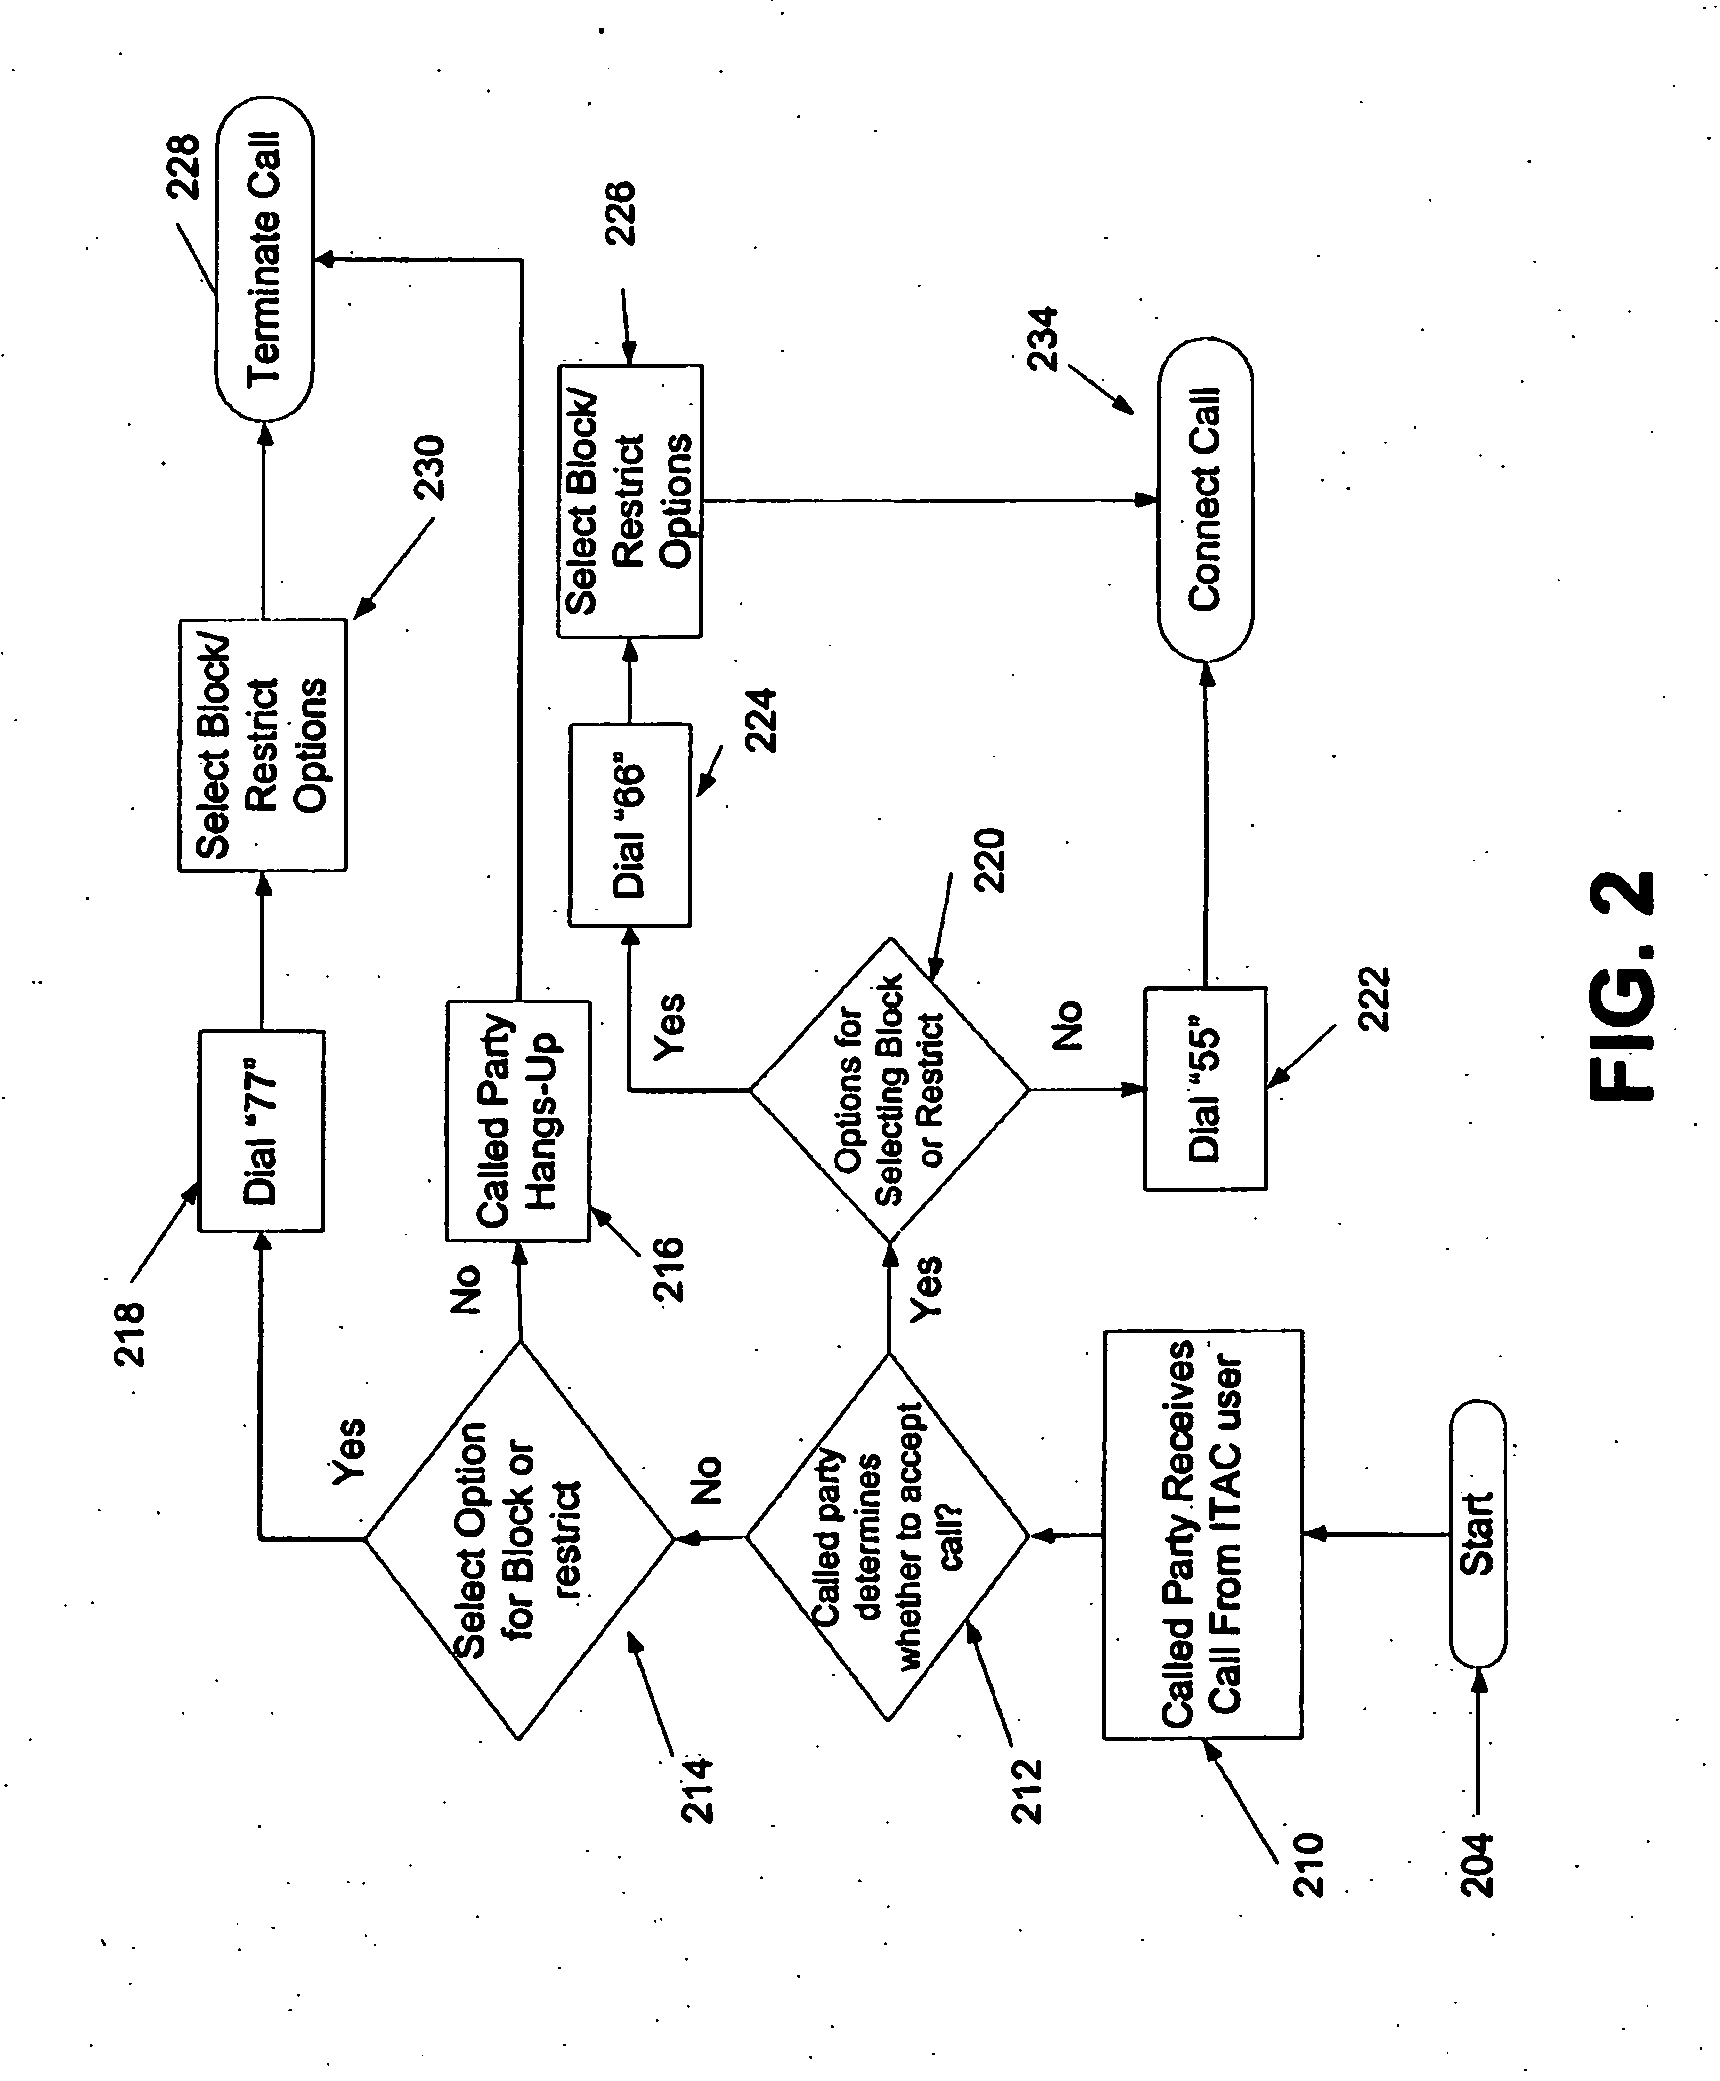 System and method for controlled call handling